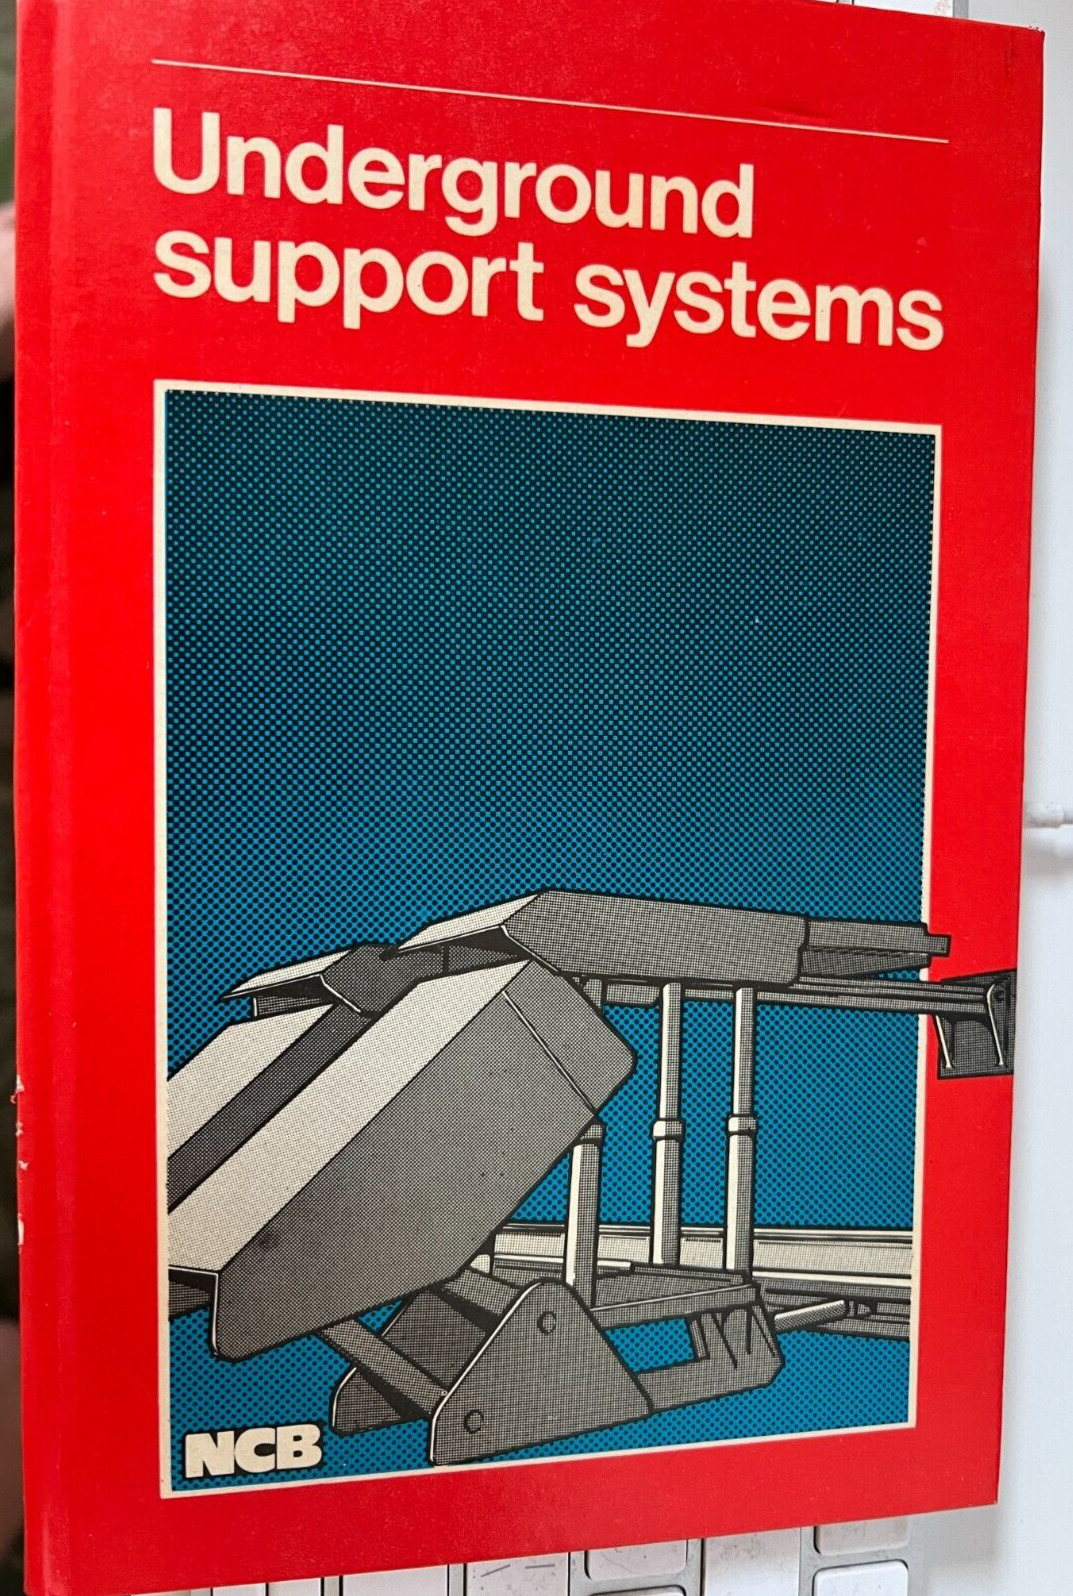 mining Underground colliery miners support systems 1979. mint condition.